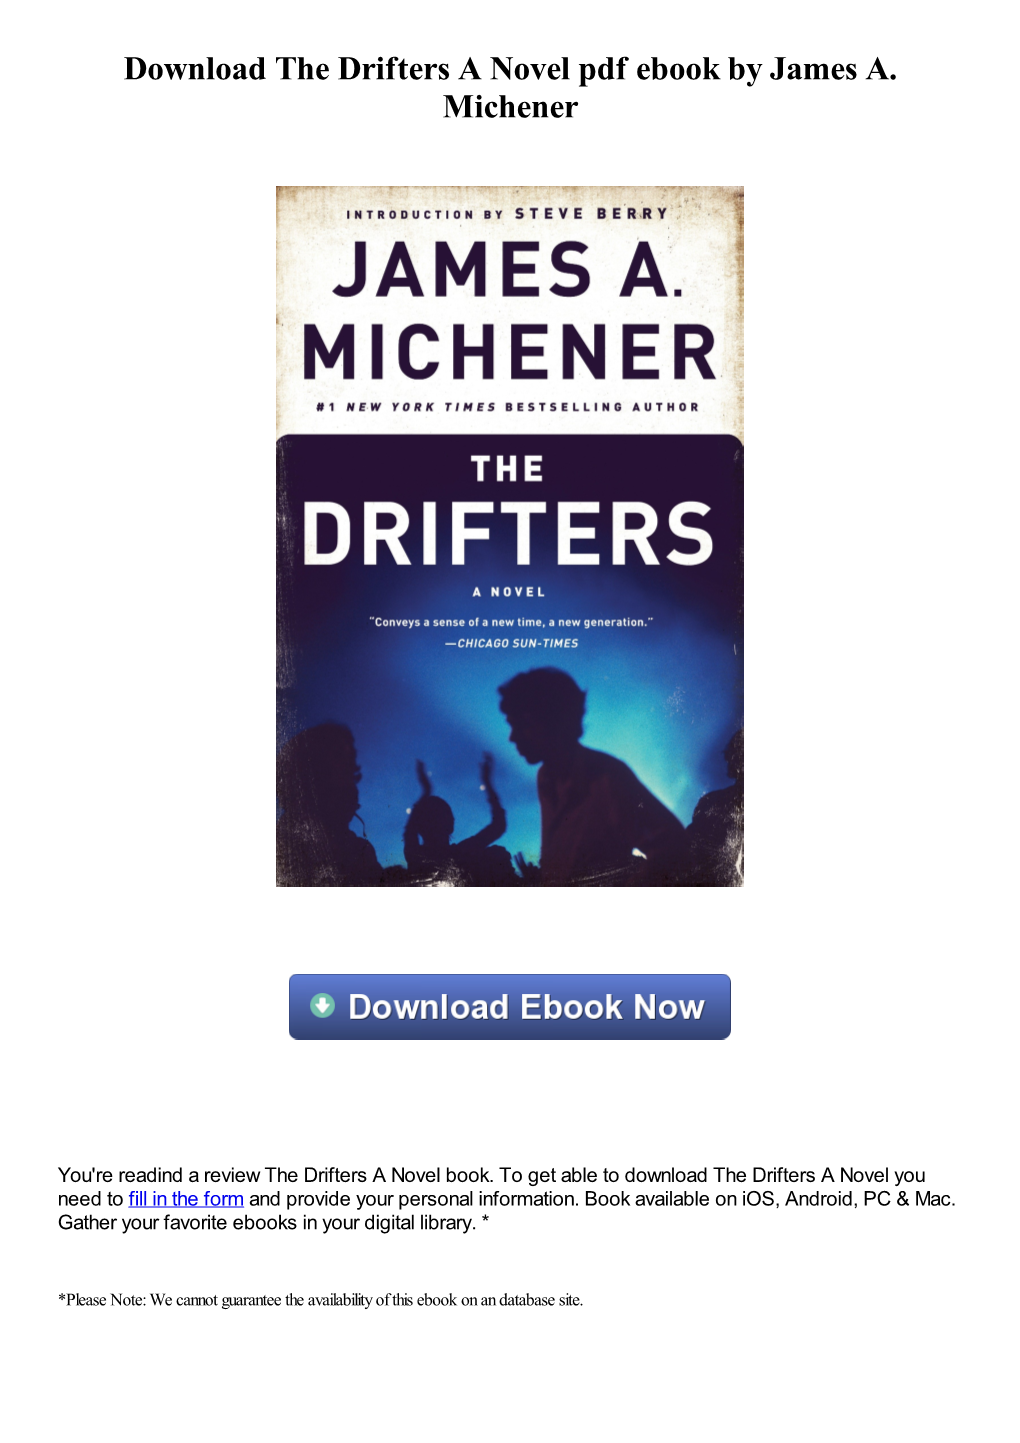 Download the Drifters a Novel Pdf Book by James A. Michener